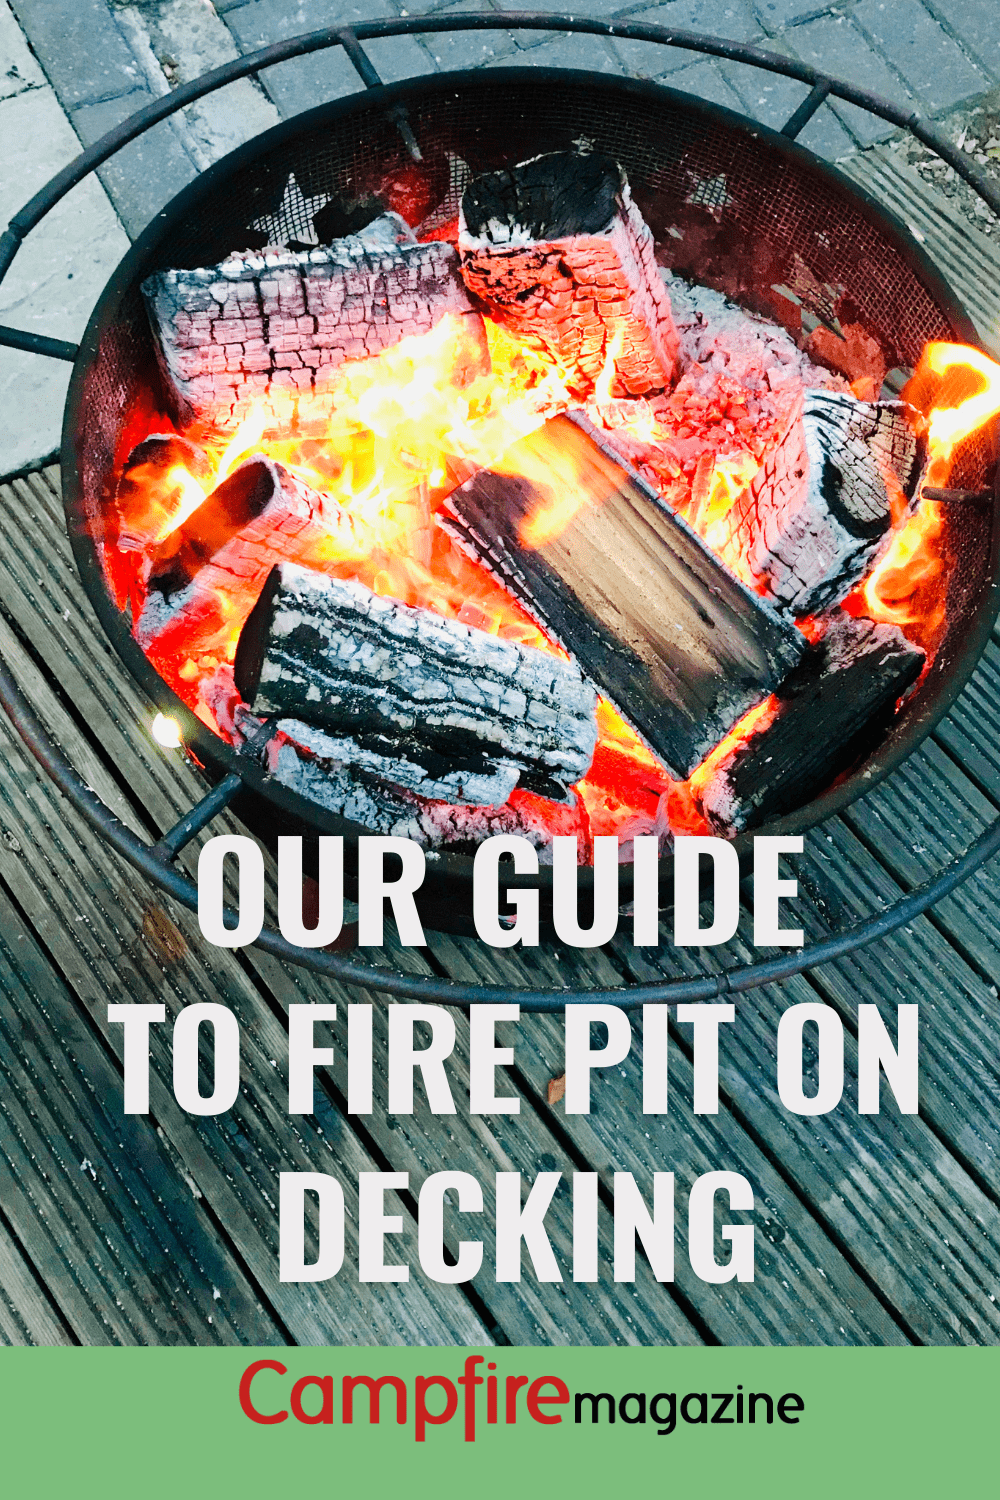 Our Guide To Have A Fire Pit On Decking, Can I Put A Fire Pit On My Composite Deck